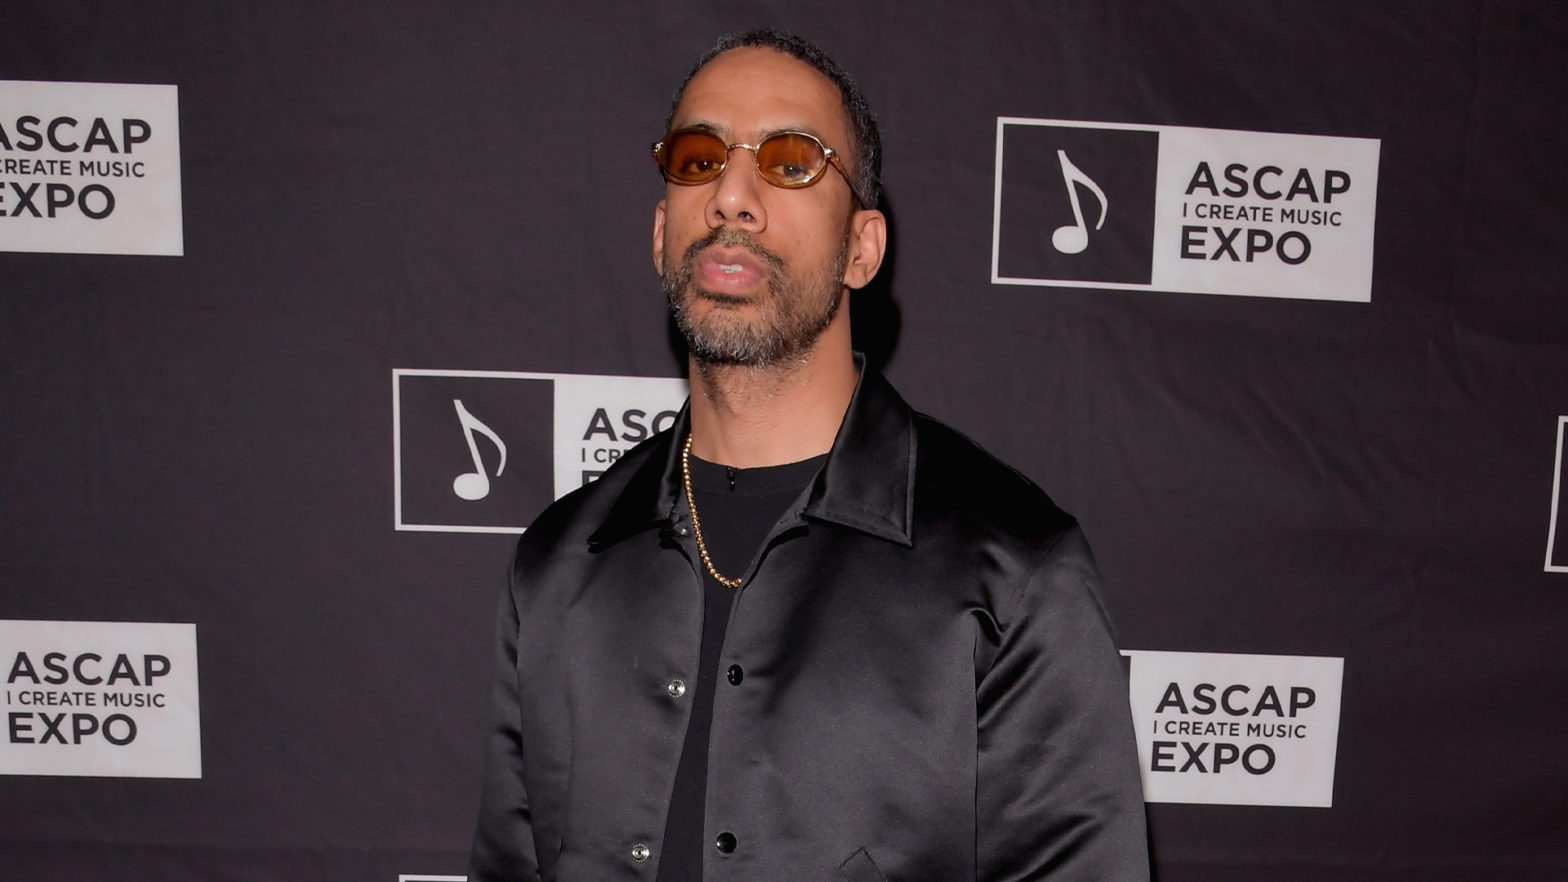 Ryan Leslie Urges Creatives To Leave Behind The Scarcity Mindset While Approaching 'Money In Hand' Opportunities